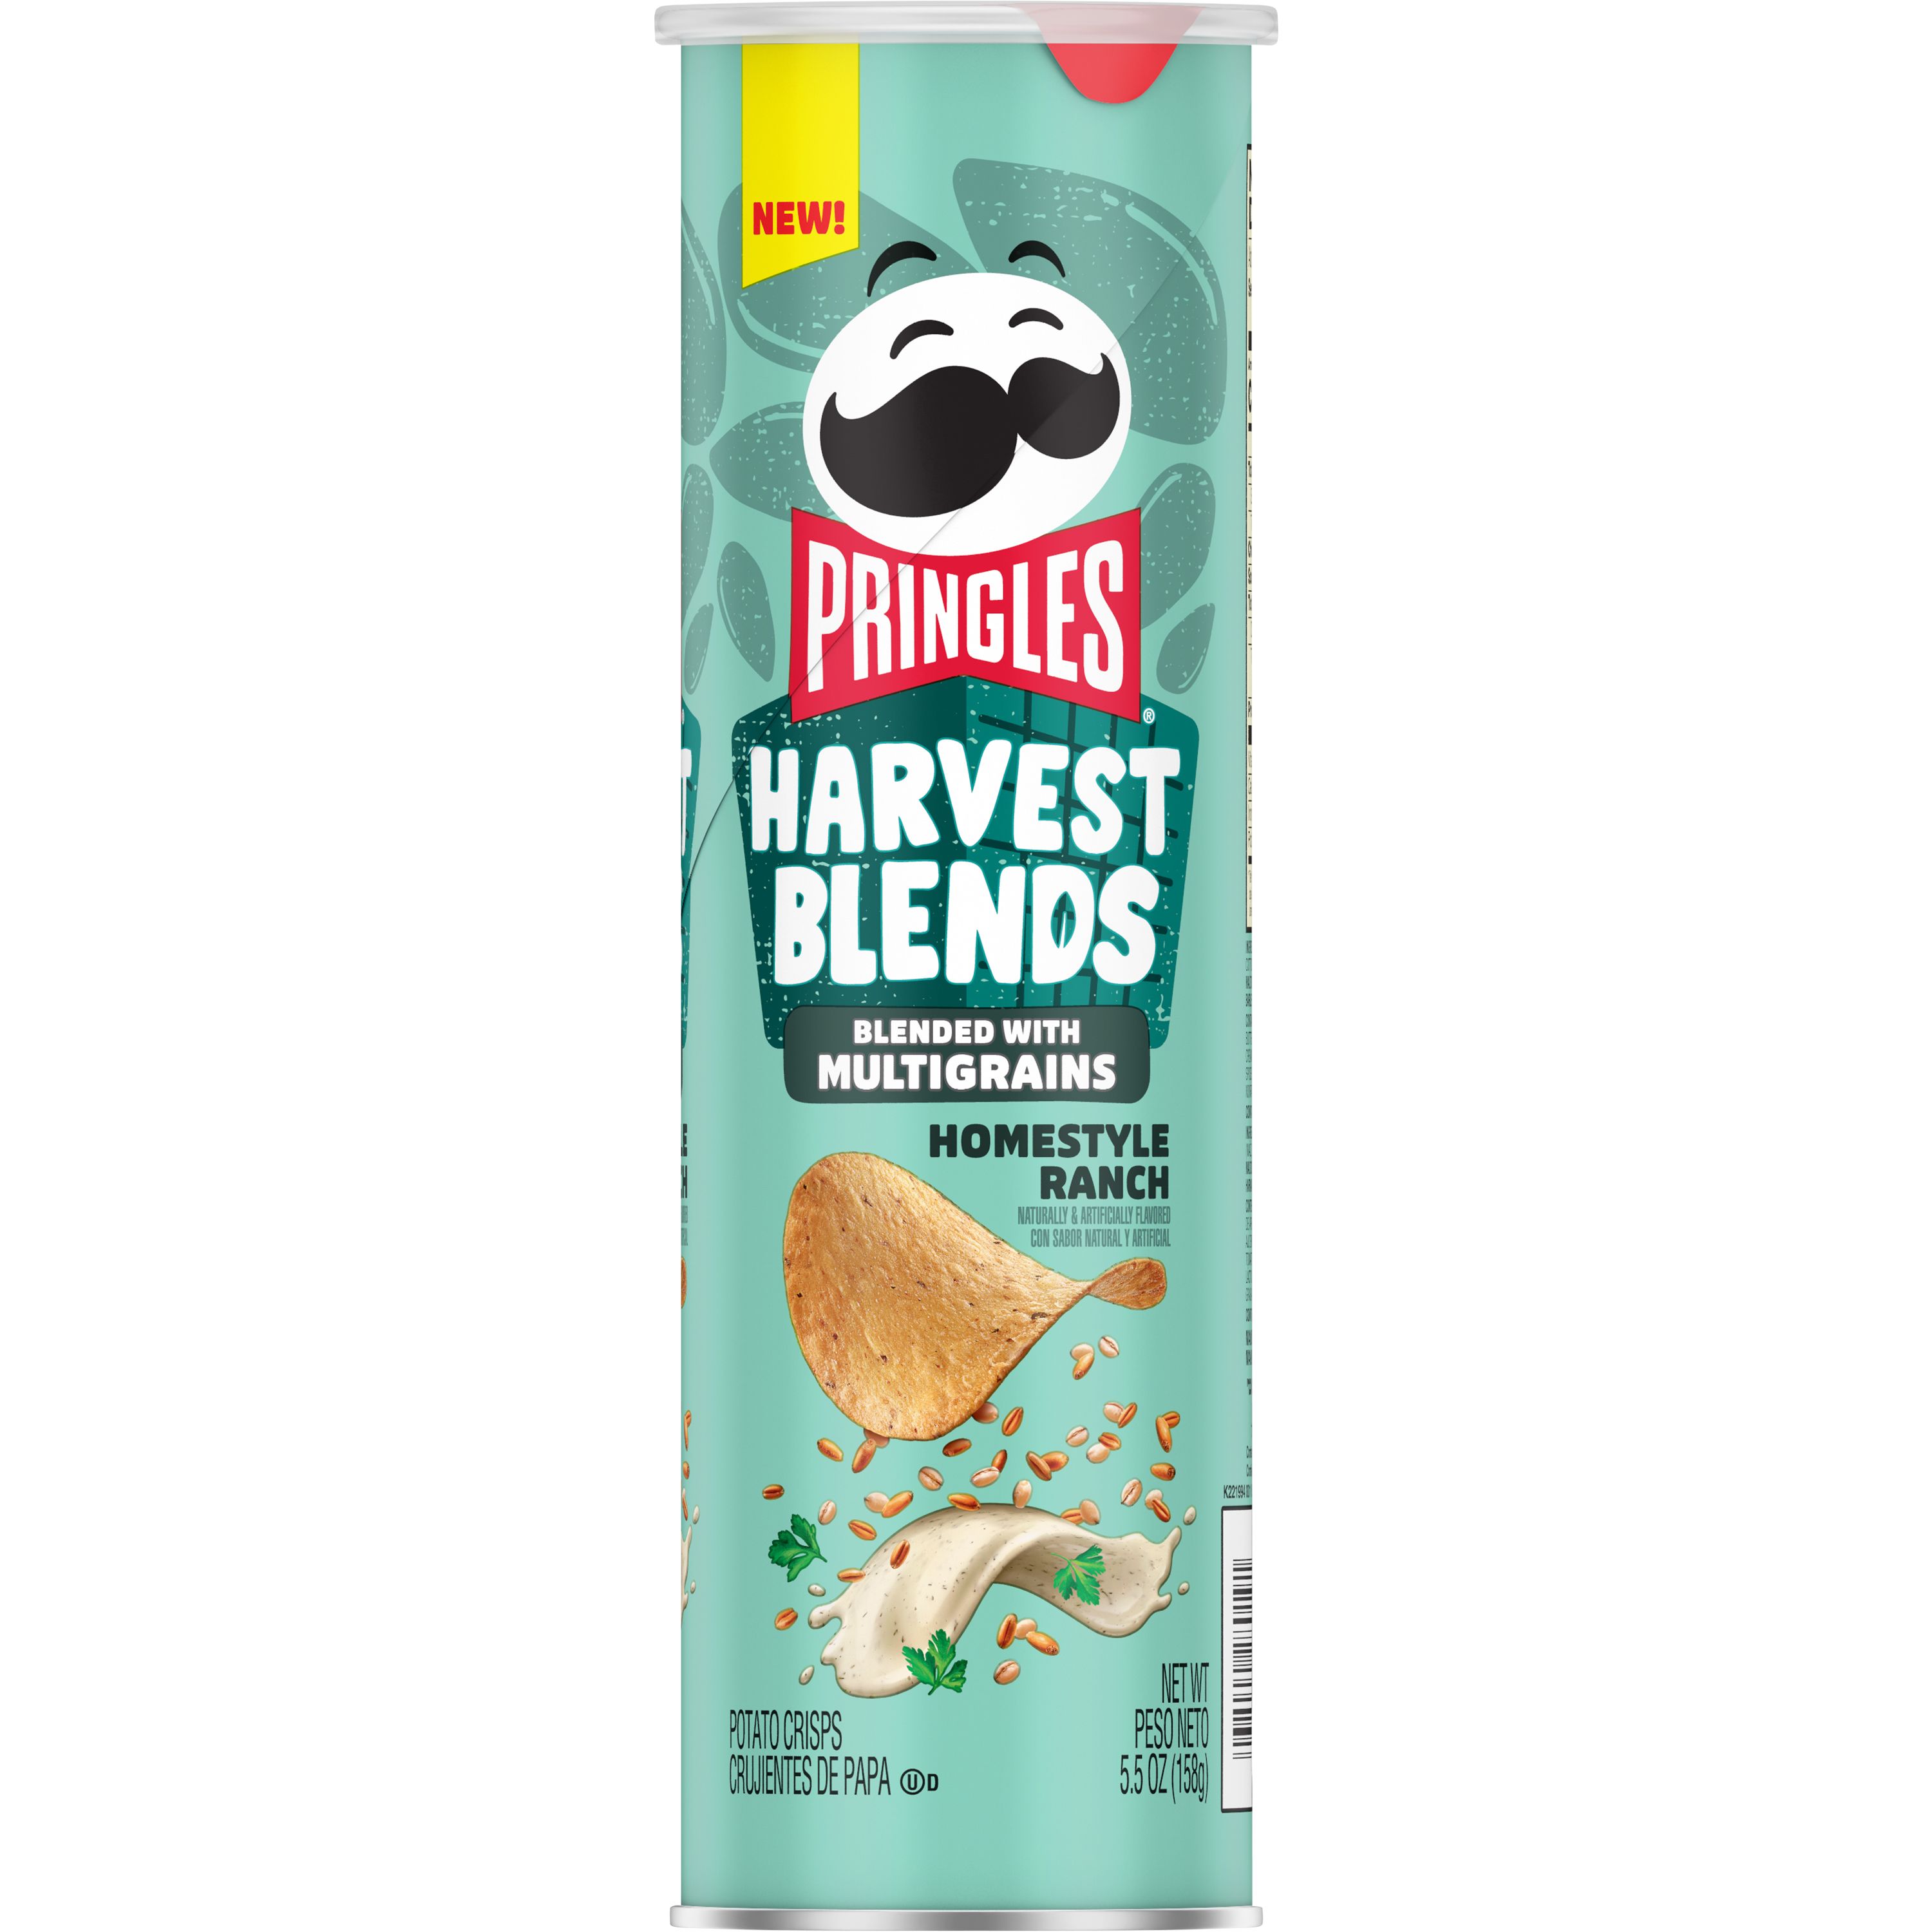 Pringles® Harvest Blends Homestyle Ranch product image thumbnail 3